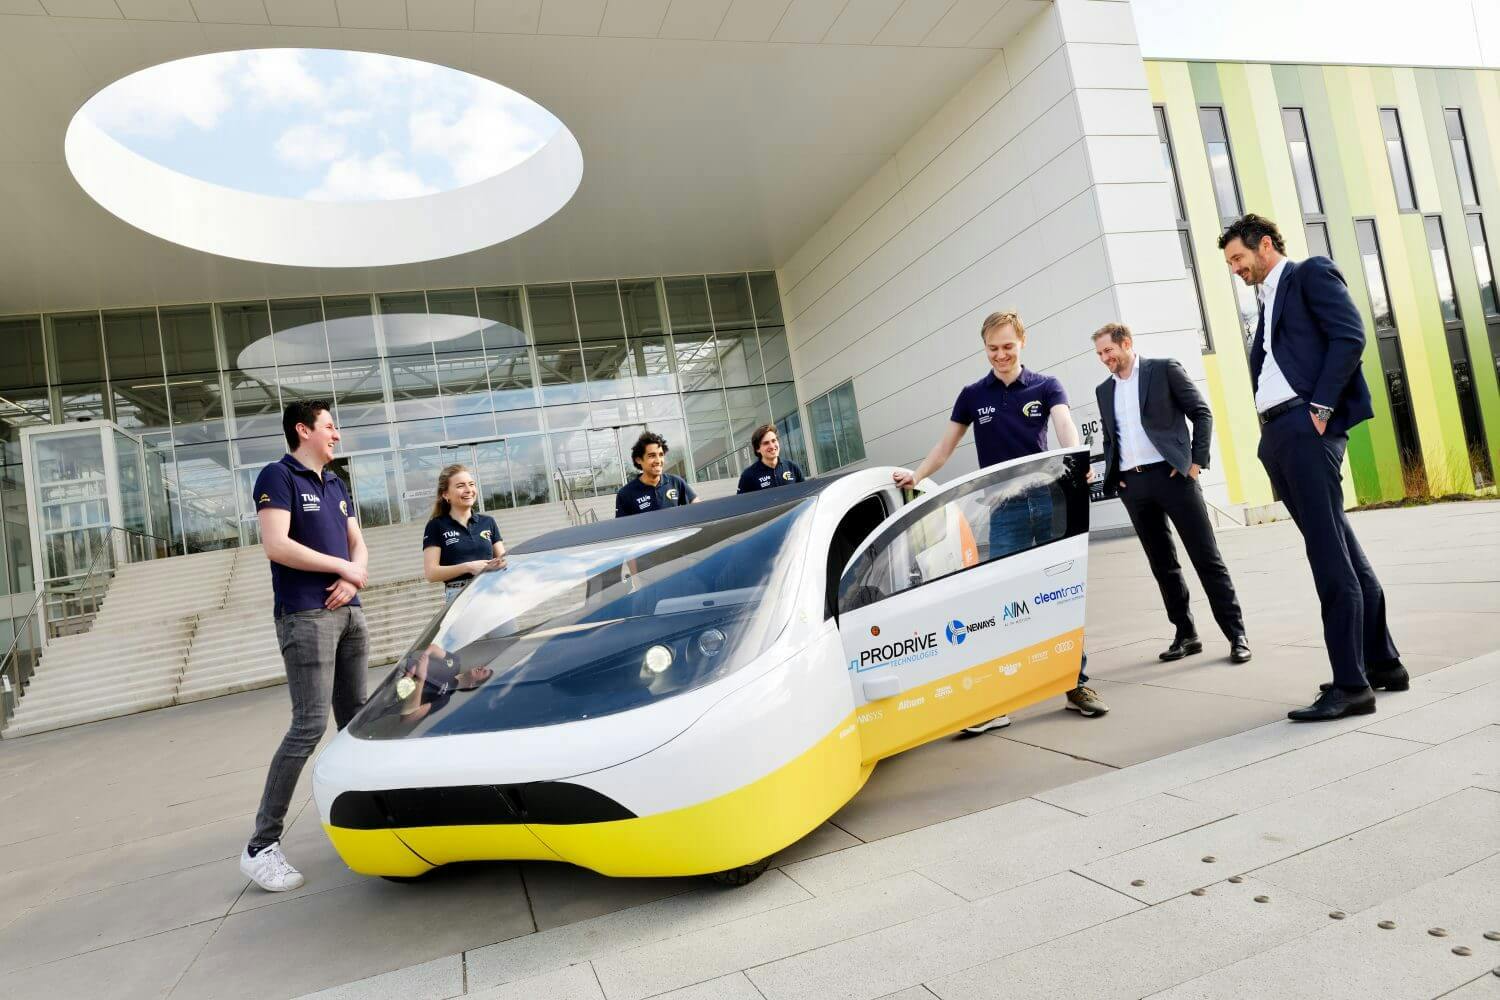  Solar Team Eindhoven continues partnership with Brainport Industries Campus
